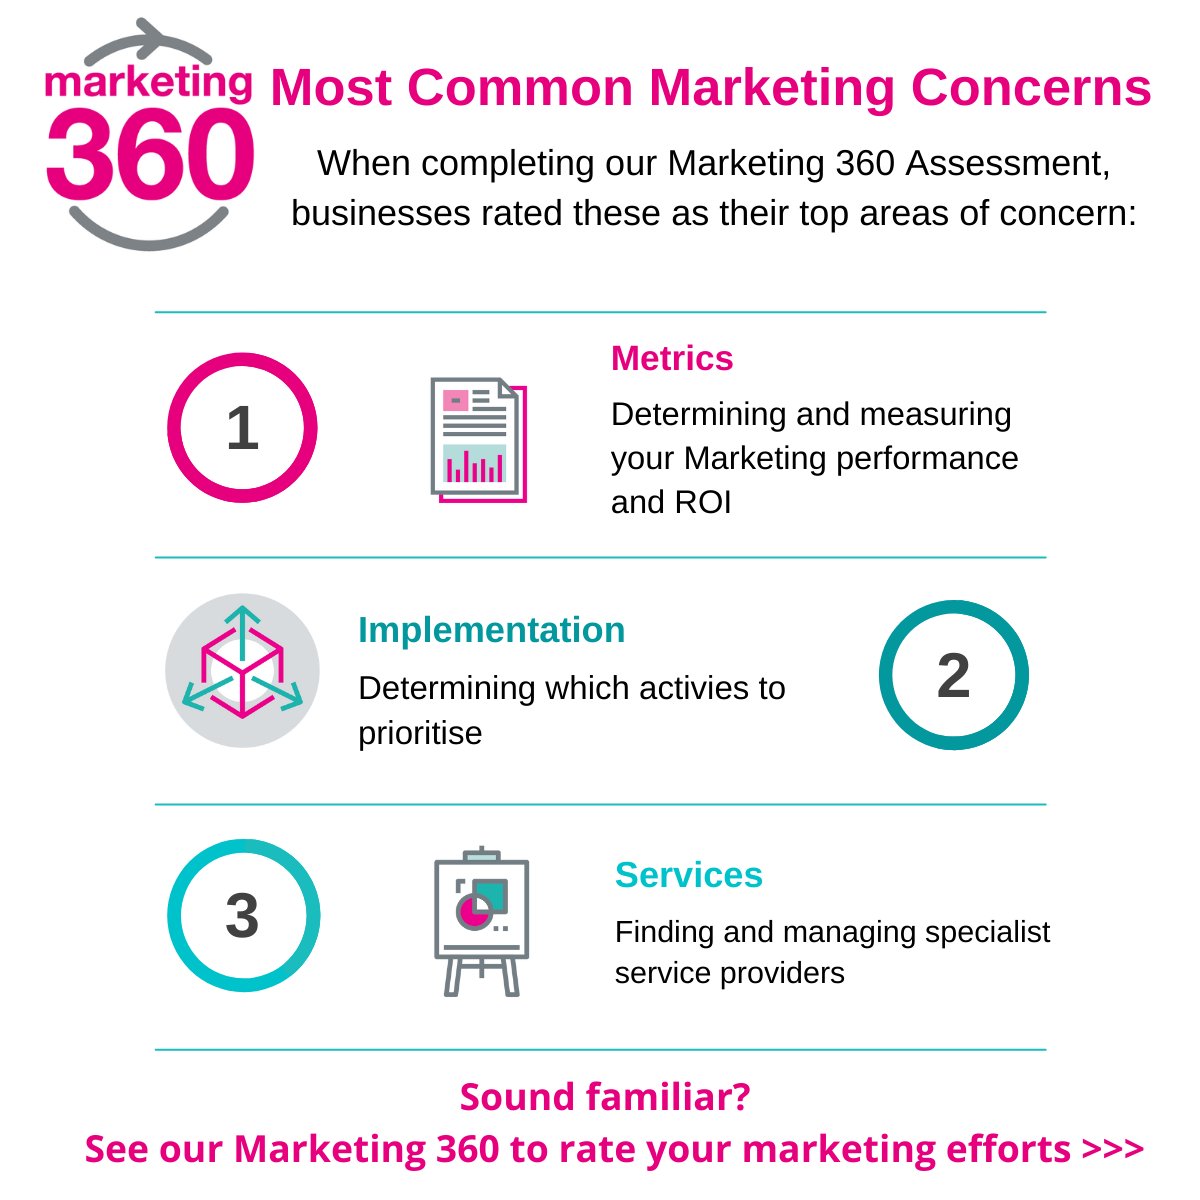 Business owners who completed @MarketingCentr's Marketing 360 Assessment ranked Marketing Metrics, Implementation and Services as they top areas of concern. 
Take our marketing assessment today to see if you agree...  
bit.ly/3UN5DEY
#themarketingcentre #marketing